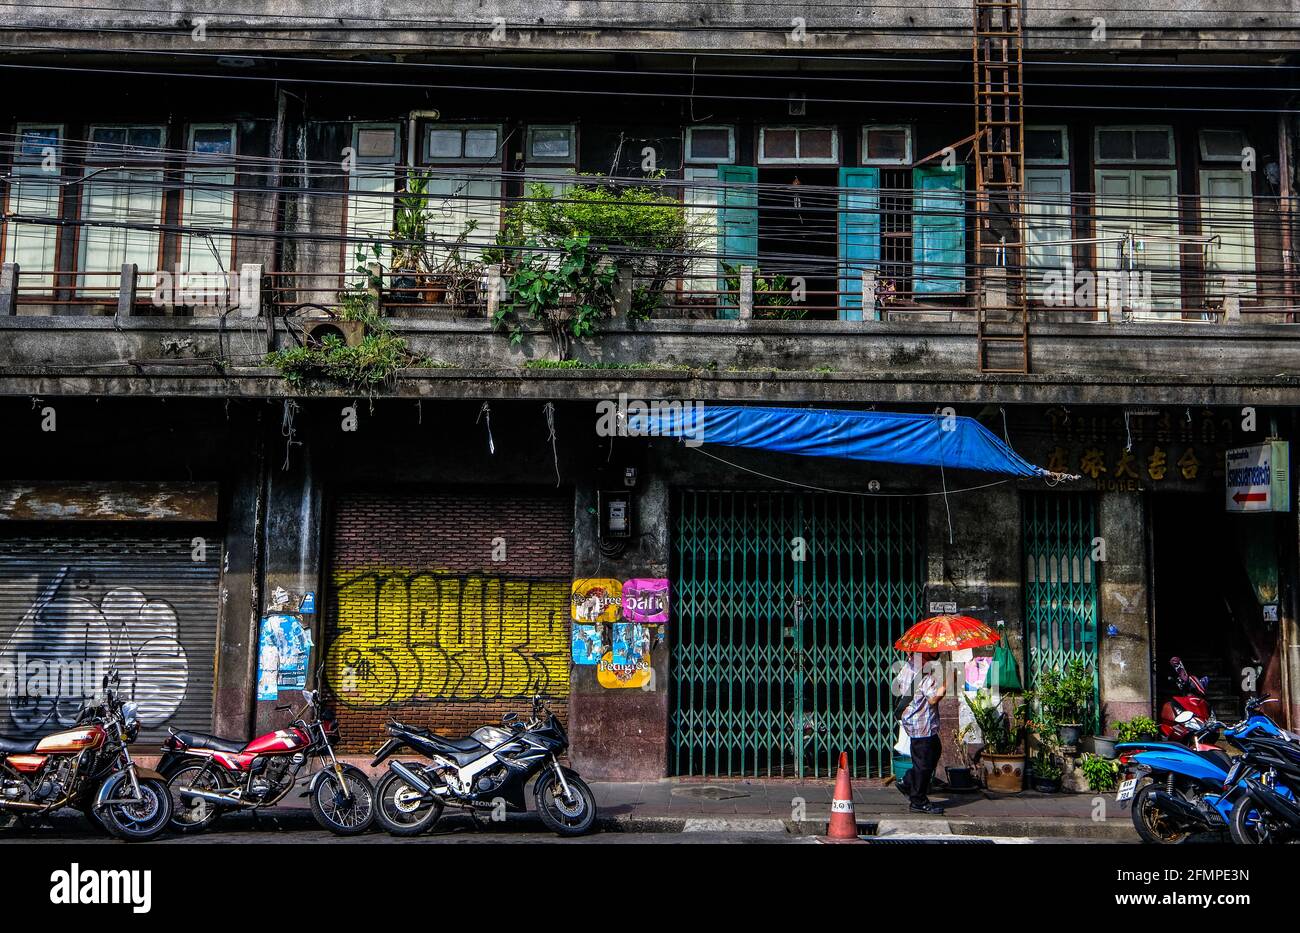 A man with a red umbrella walks past an old, graffiti-clad, building in the Chinatown area of Bangkok, Thailand Stock Photo